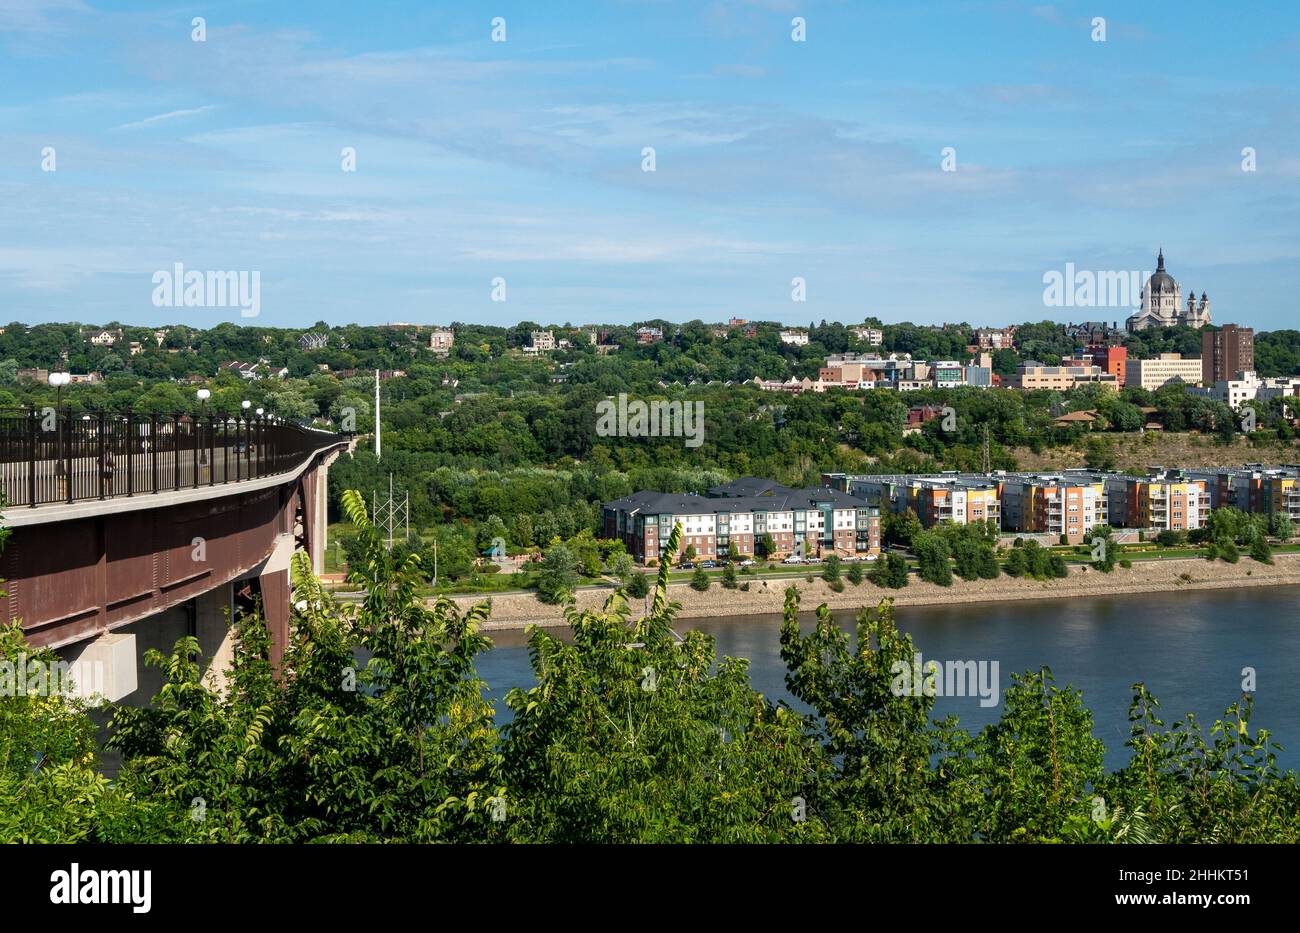 ST PAUL, MN - 25 AUG 2020: The High Bridge over the Mississippi River and the Cathedral of St Paul. Stock Photo